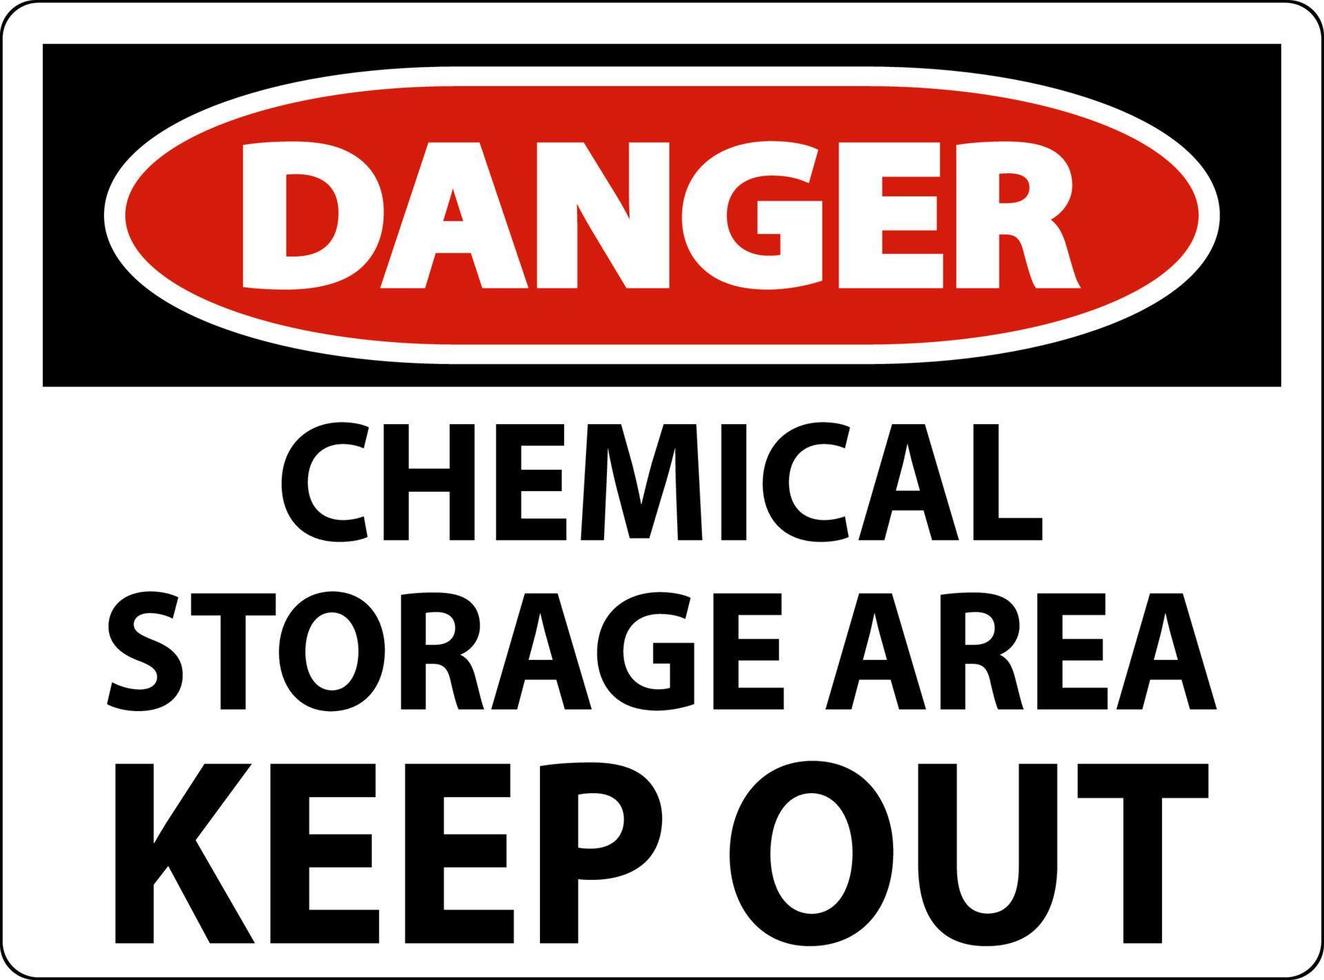 Danger Label Chemical Storage Area Keep Out Sign vector